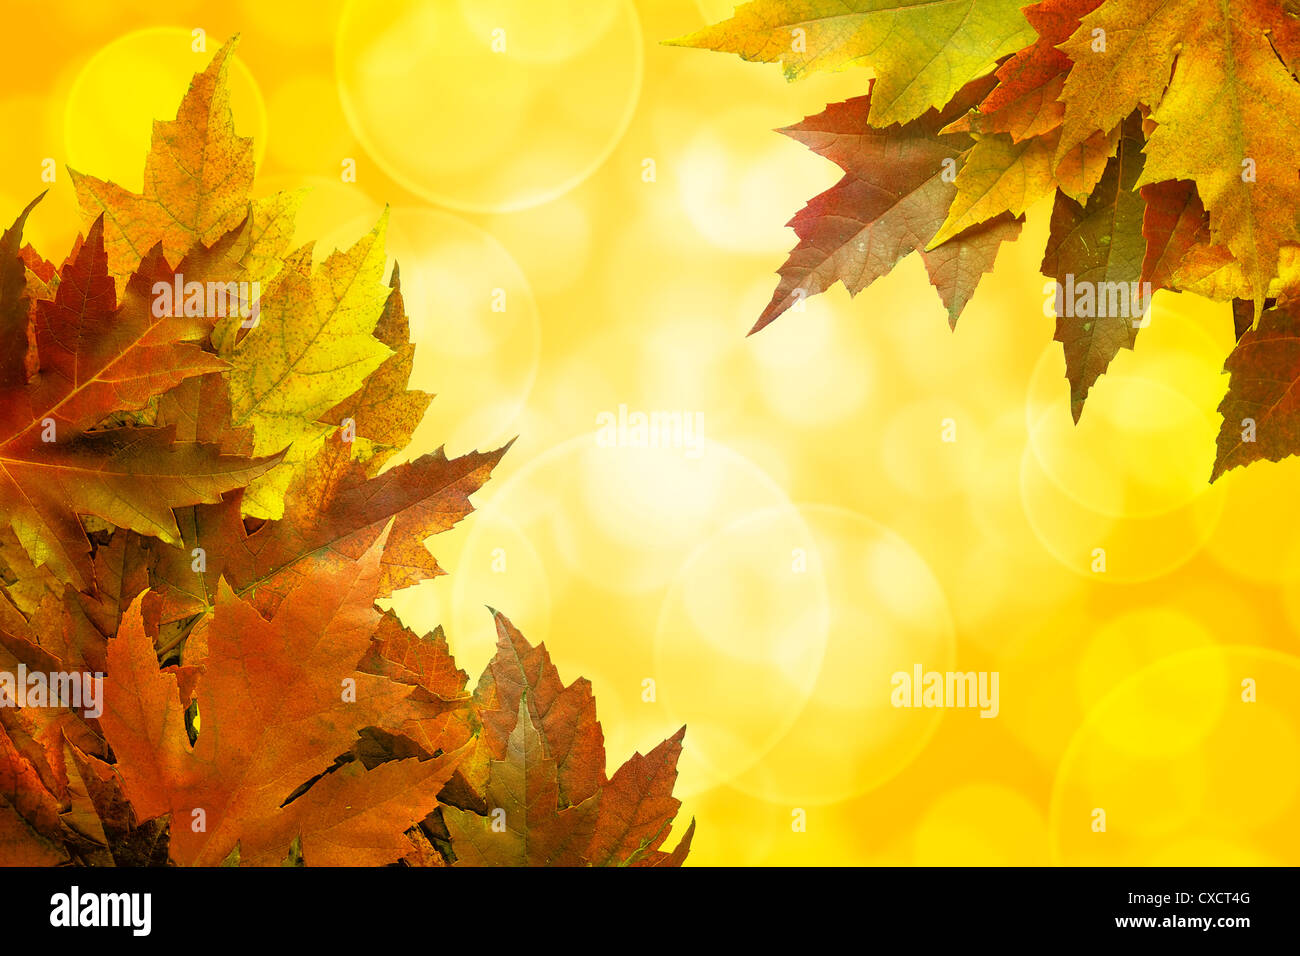 Fall Color Maple Tree Leaves on Blurred Sunlight Background Border Stock Photo